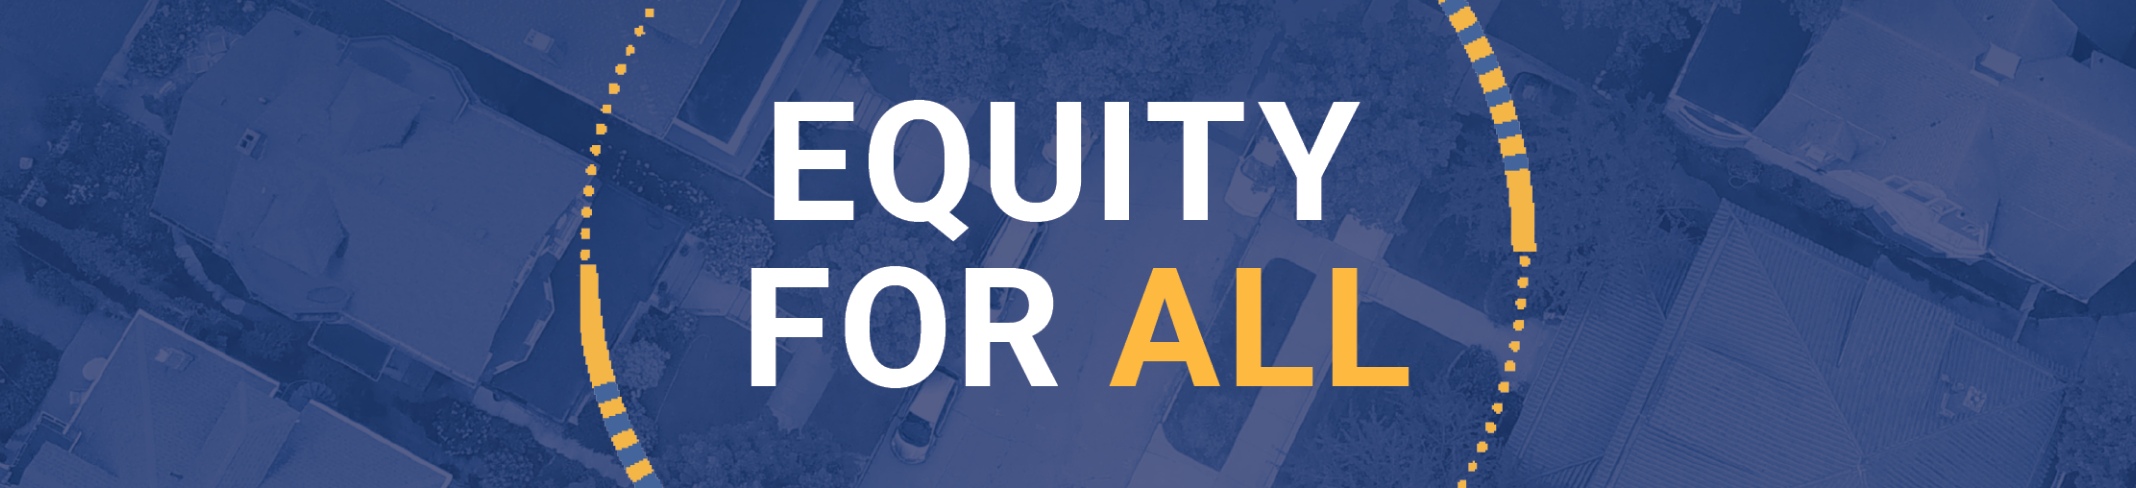 FW Metro Equity for All